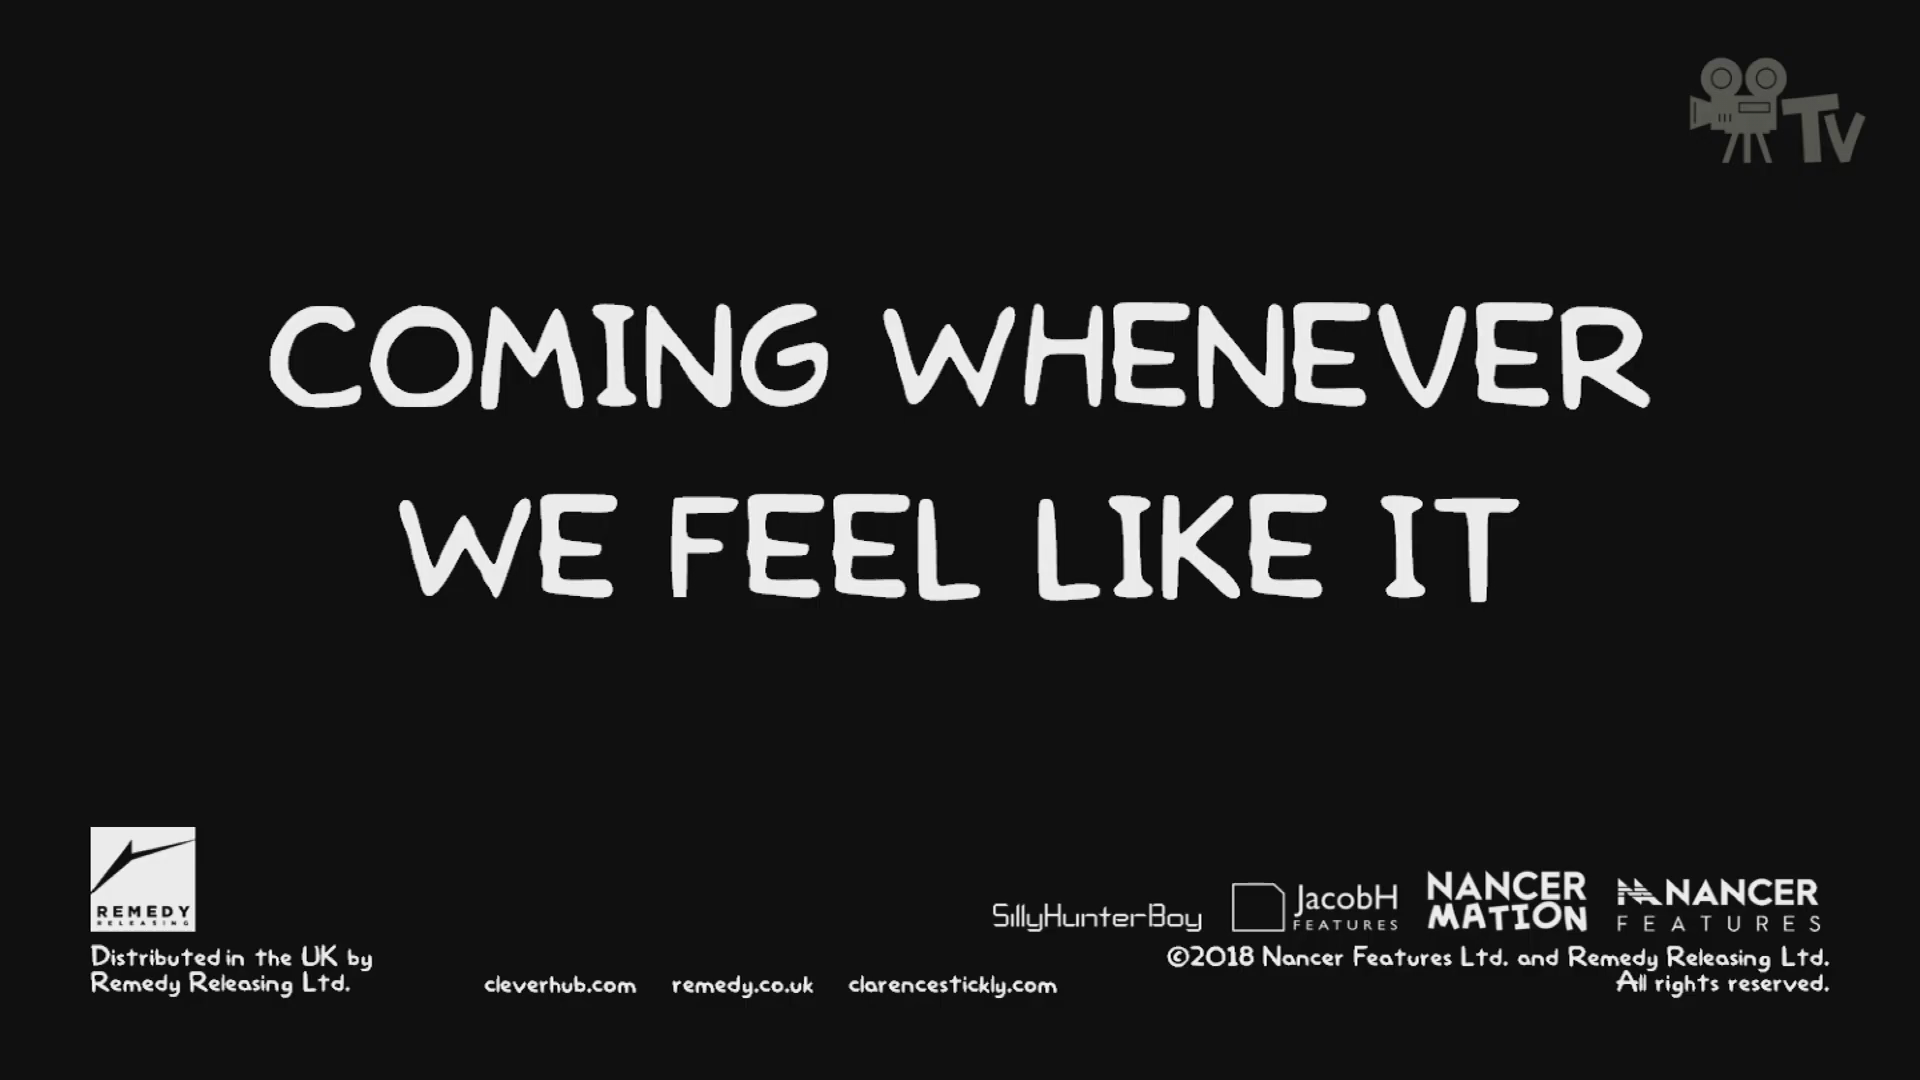 The font in the "COMING WHENEVER WE FEEL LIKE IT" text.